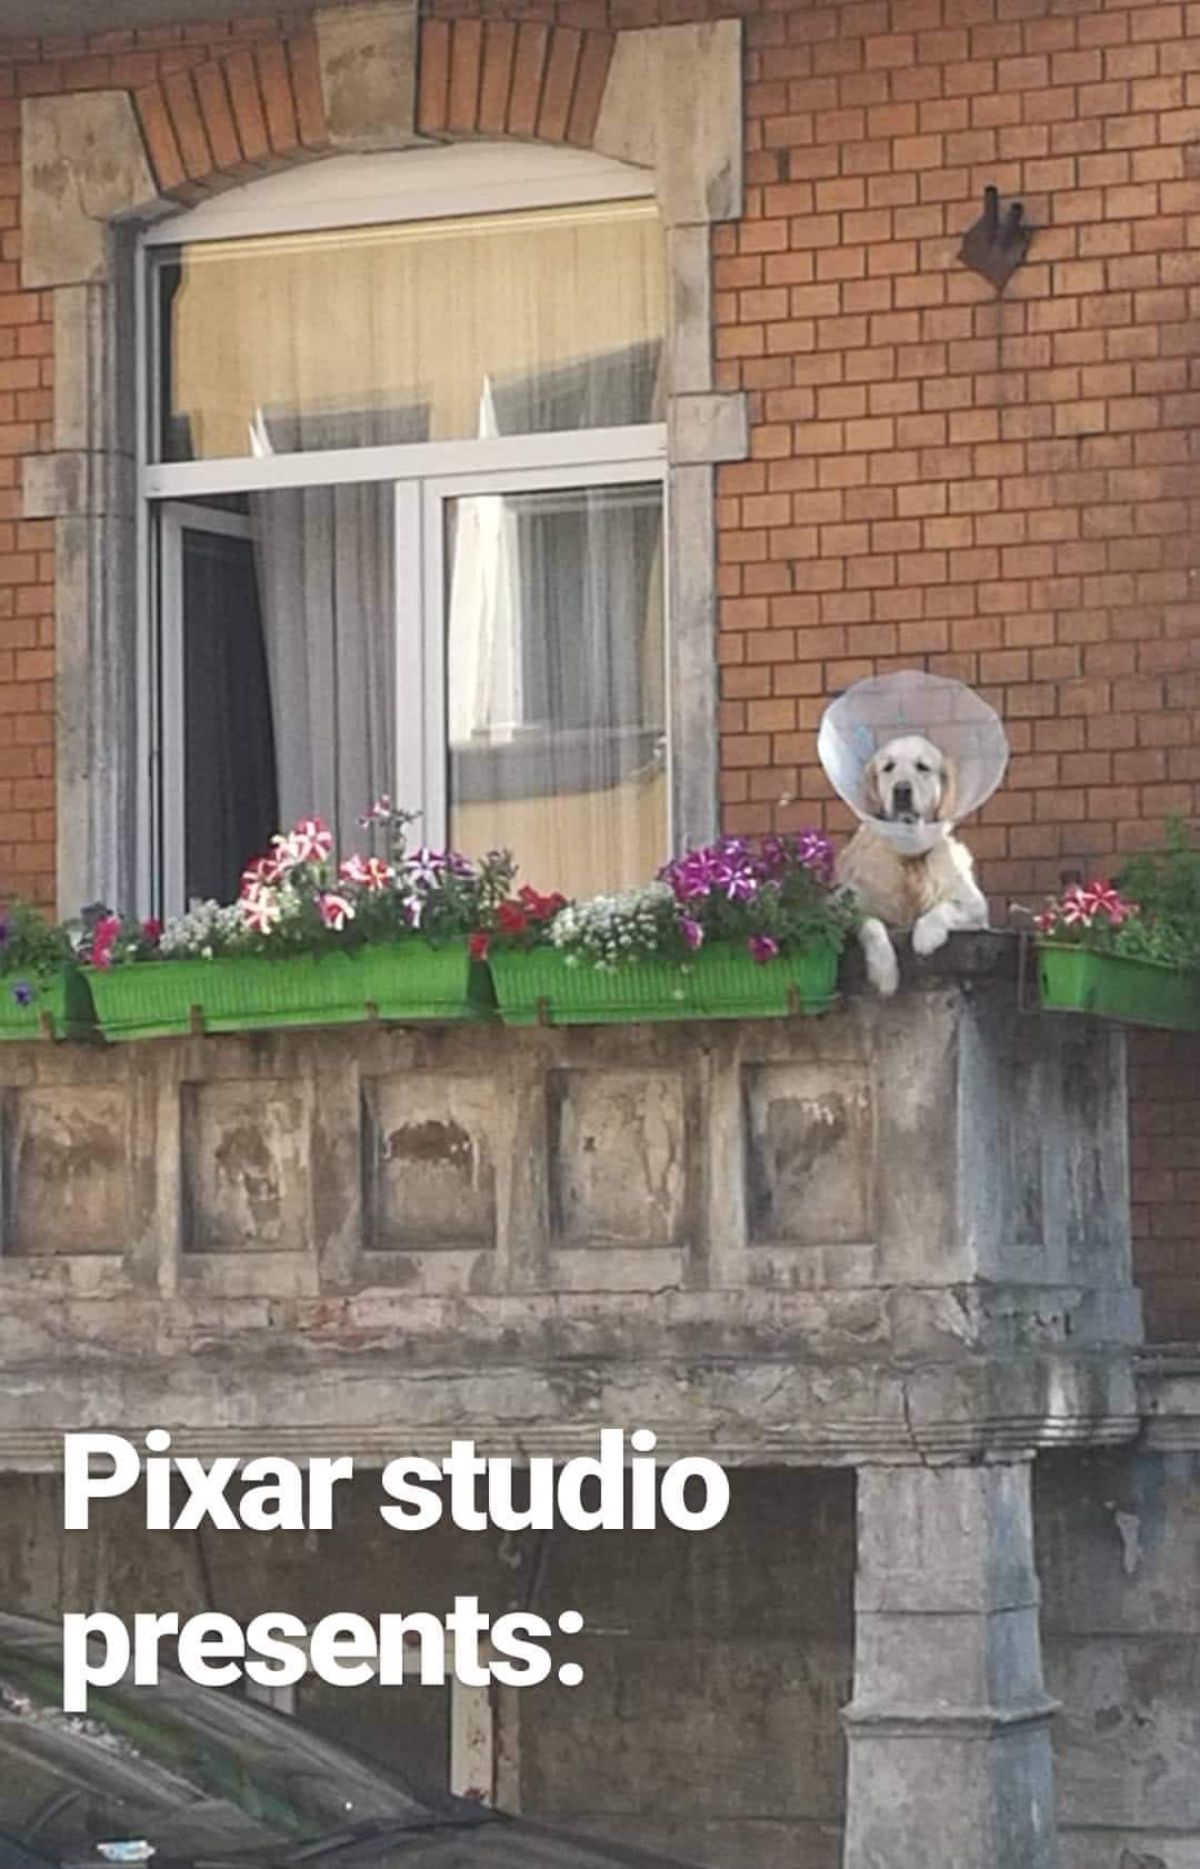 golden retriever wearing a plastic cone hanging over a balcony with green flower pots with pink flowers with the image saying Pixar studio presents at the bottom